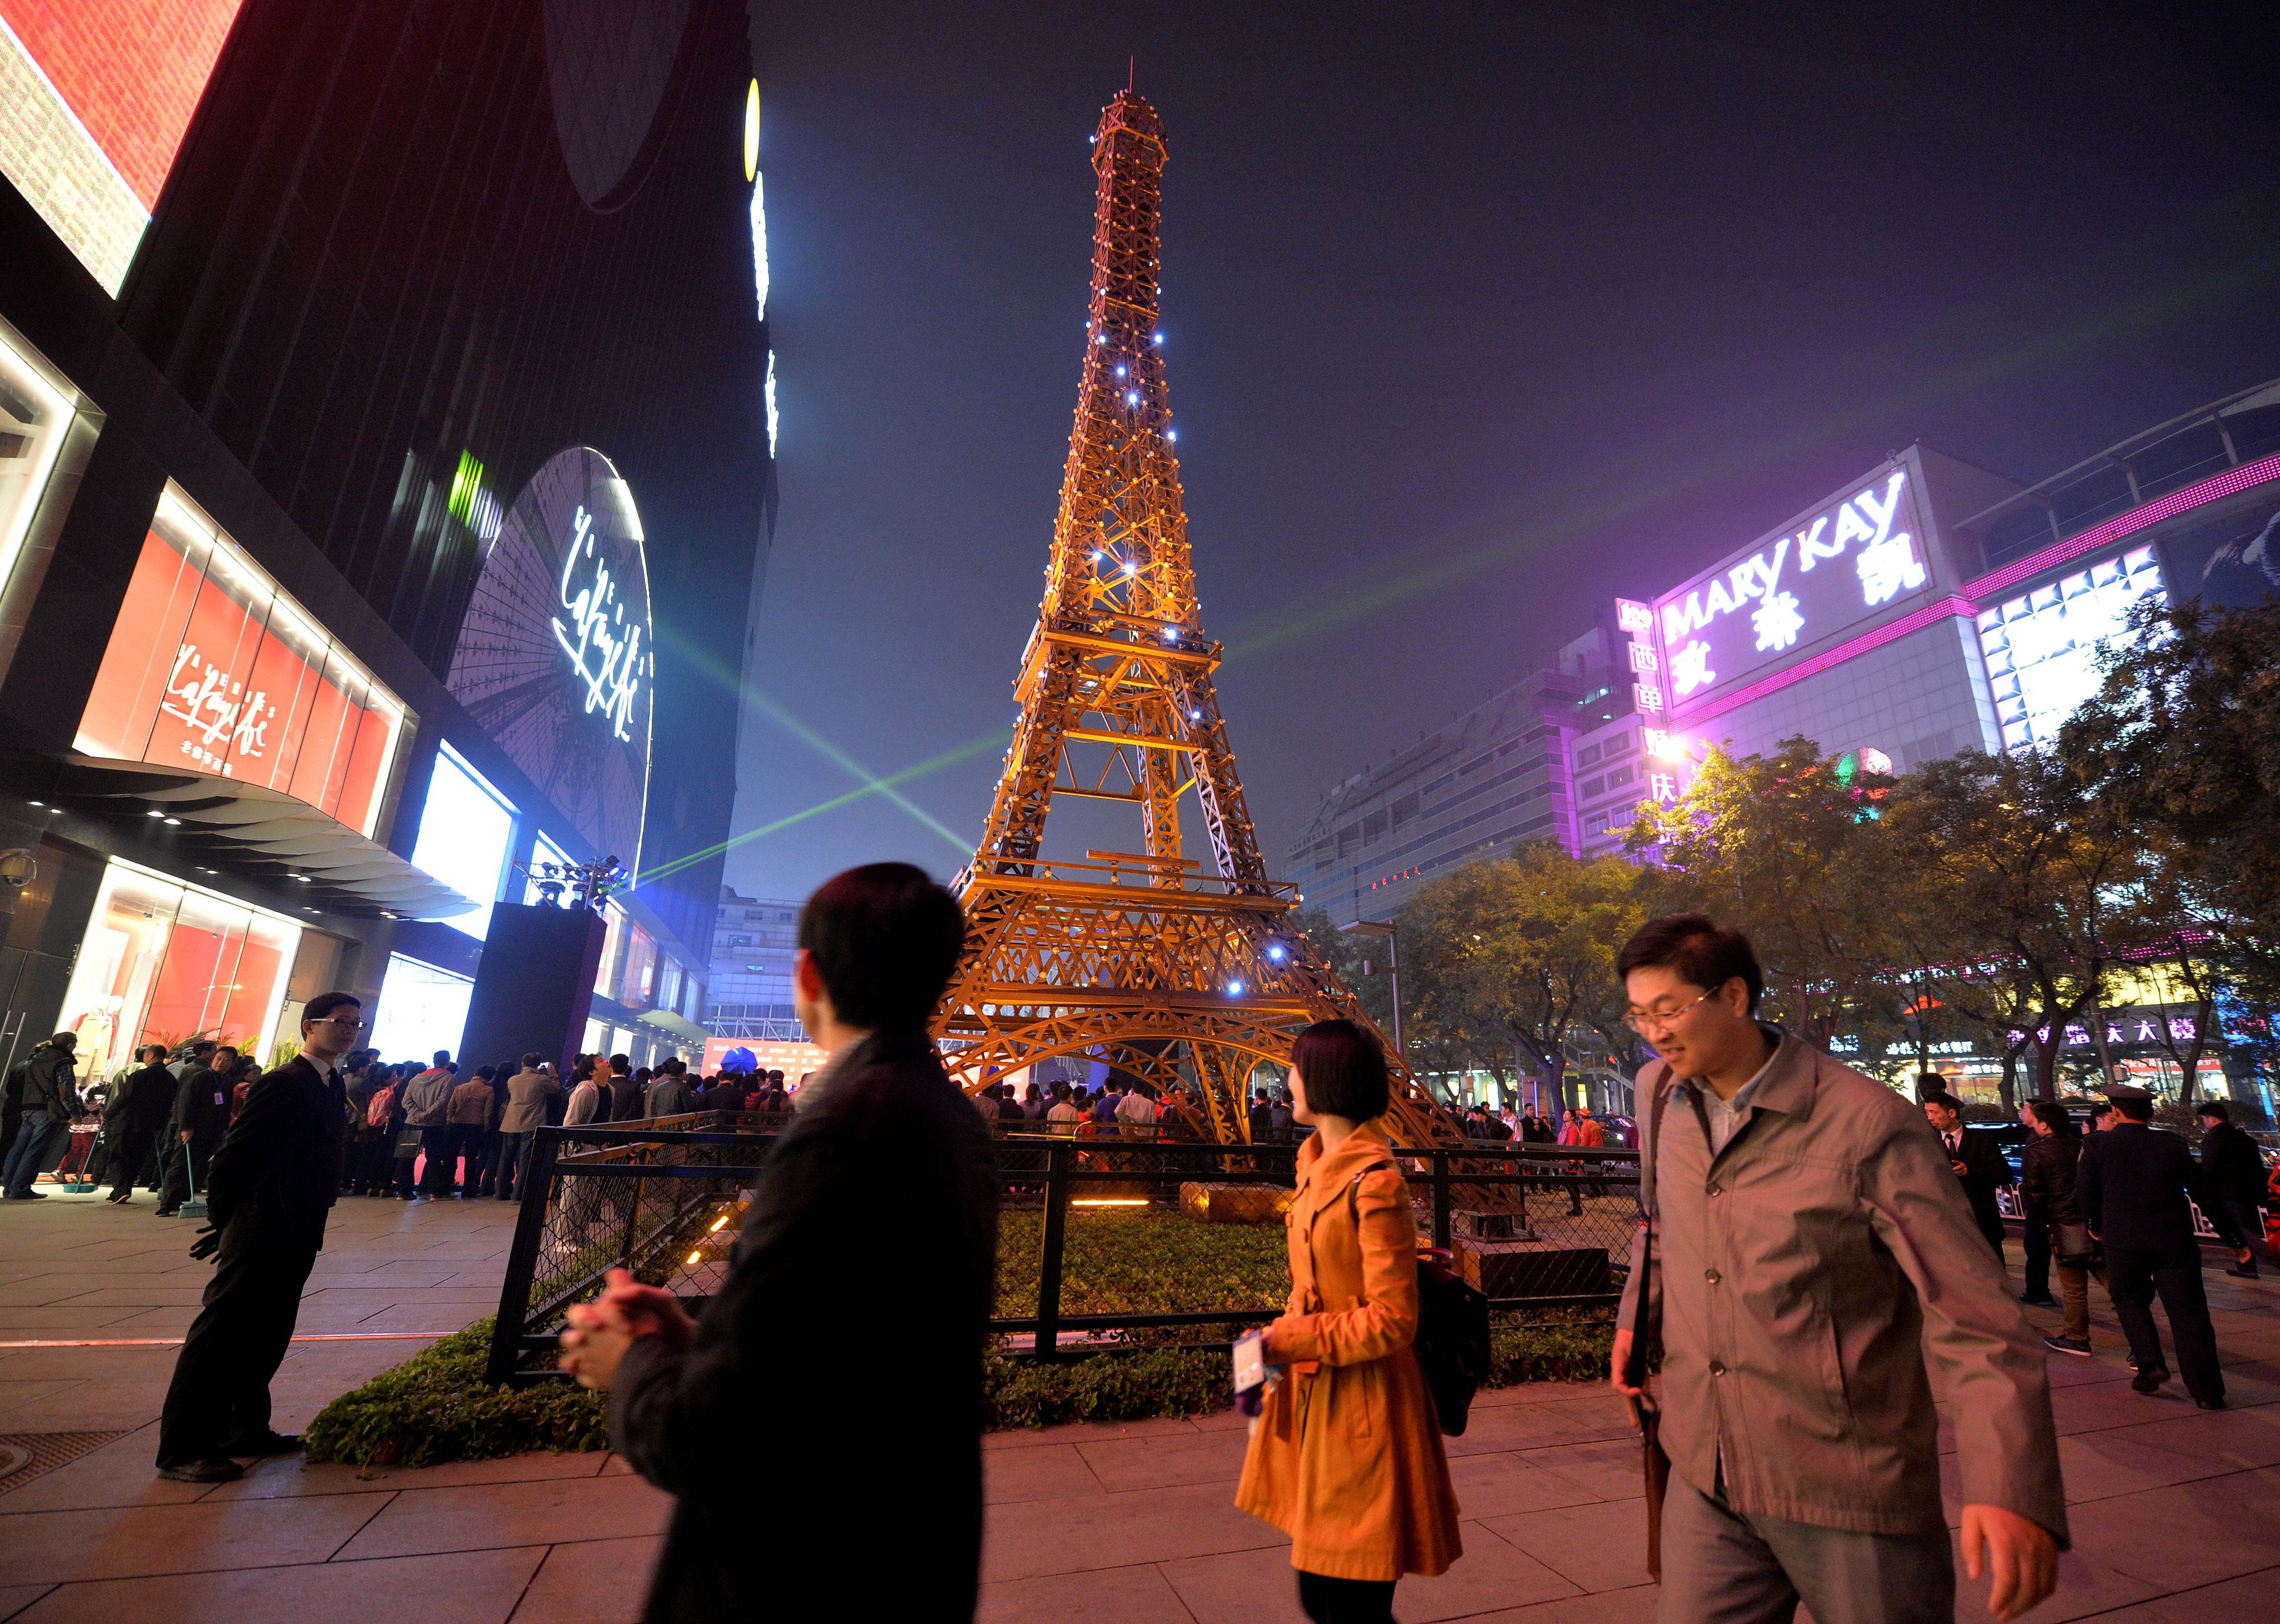 Chinese shoppers stand beside a model of the Eiffel Tower outside the Galeries Lafayette department store during its official opening in Beijing in October, 2013. Photo: AFP